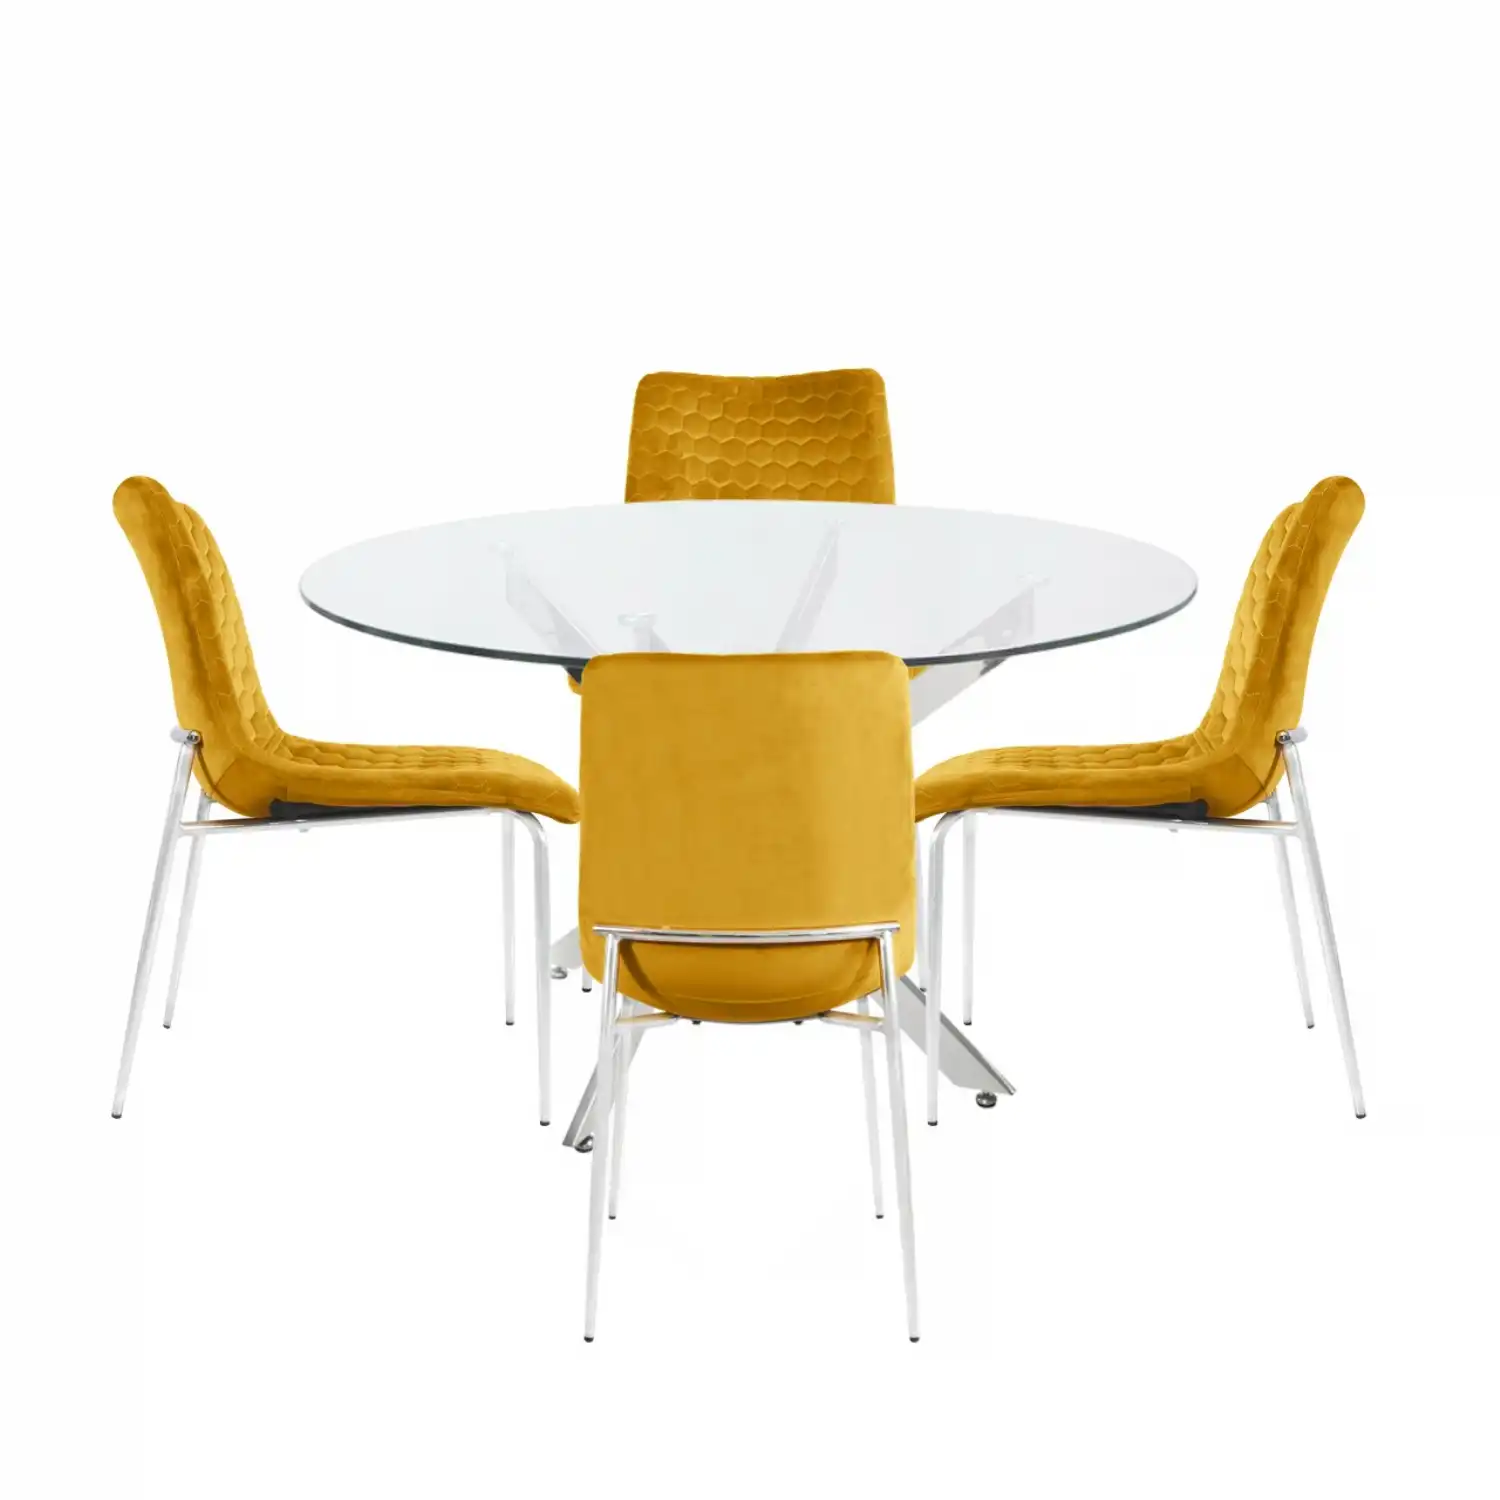 Nova 130cm Round Dining Table And 4 Mustard Chairs